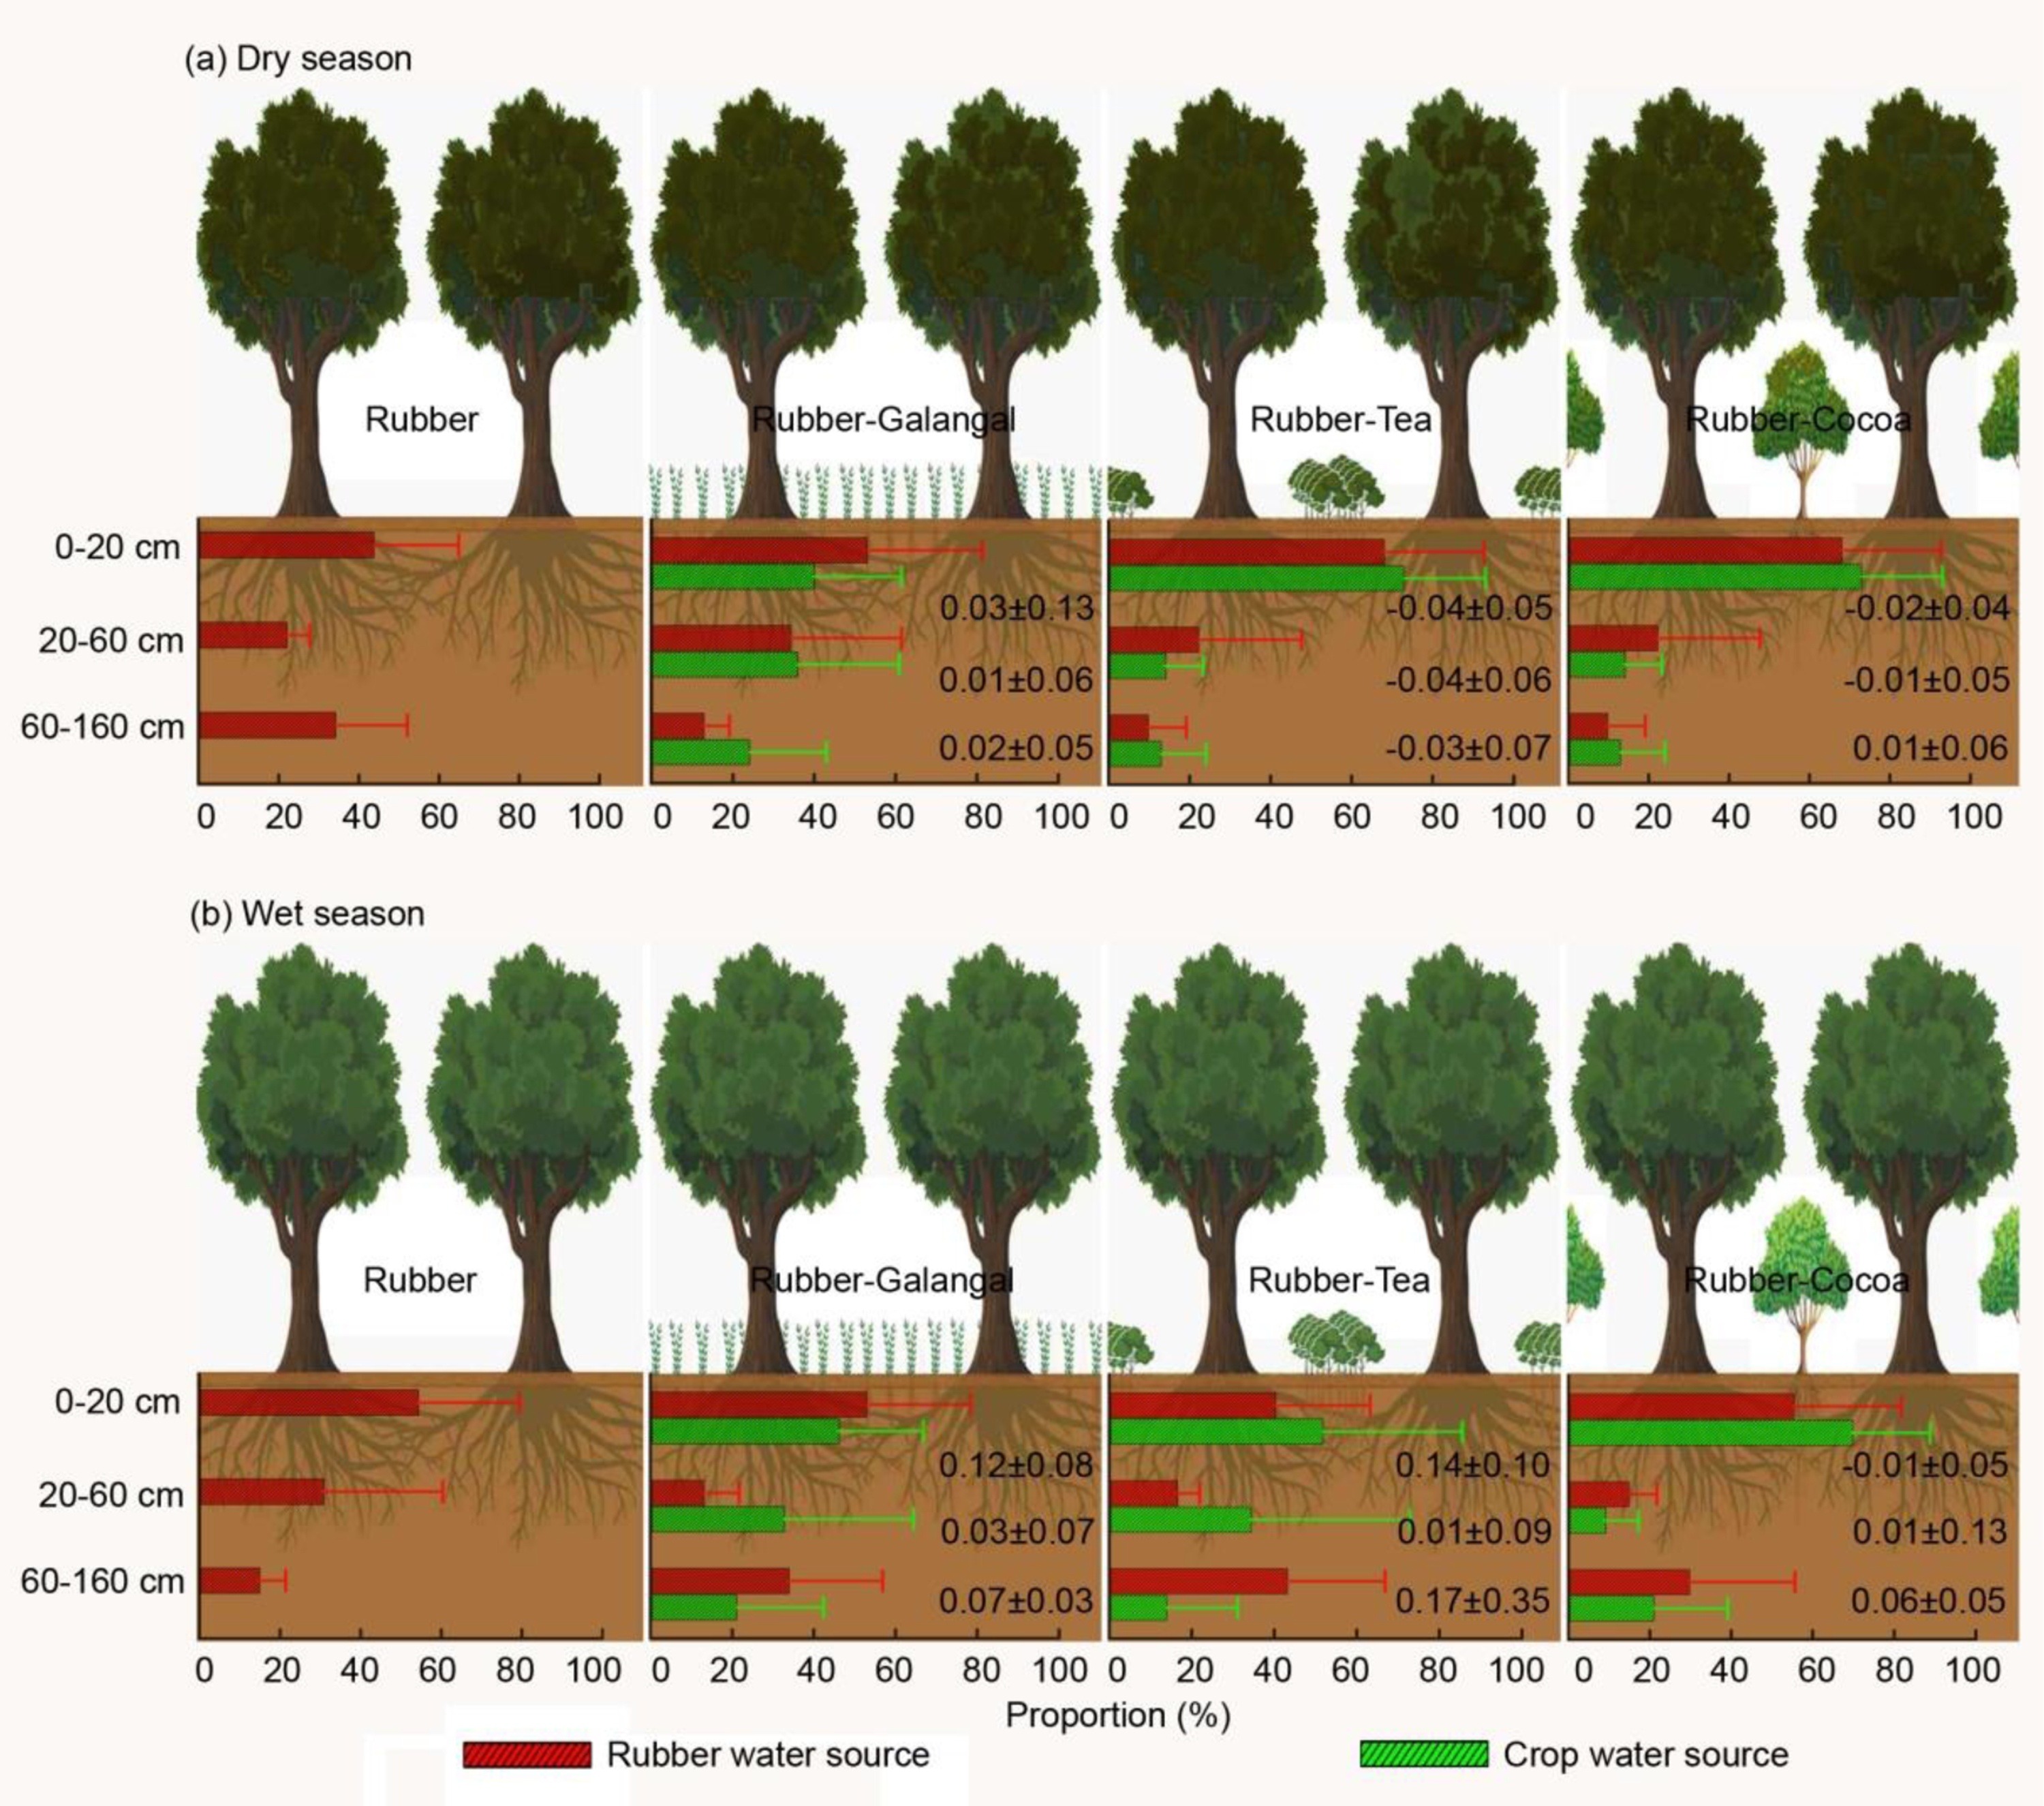 Schematic illustrating the water source of rubber trees and intercrops in the dry and wet seasons.jpg